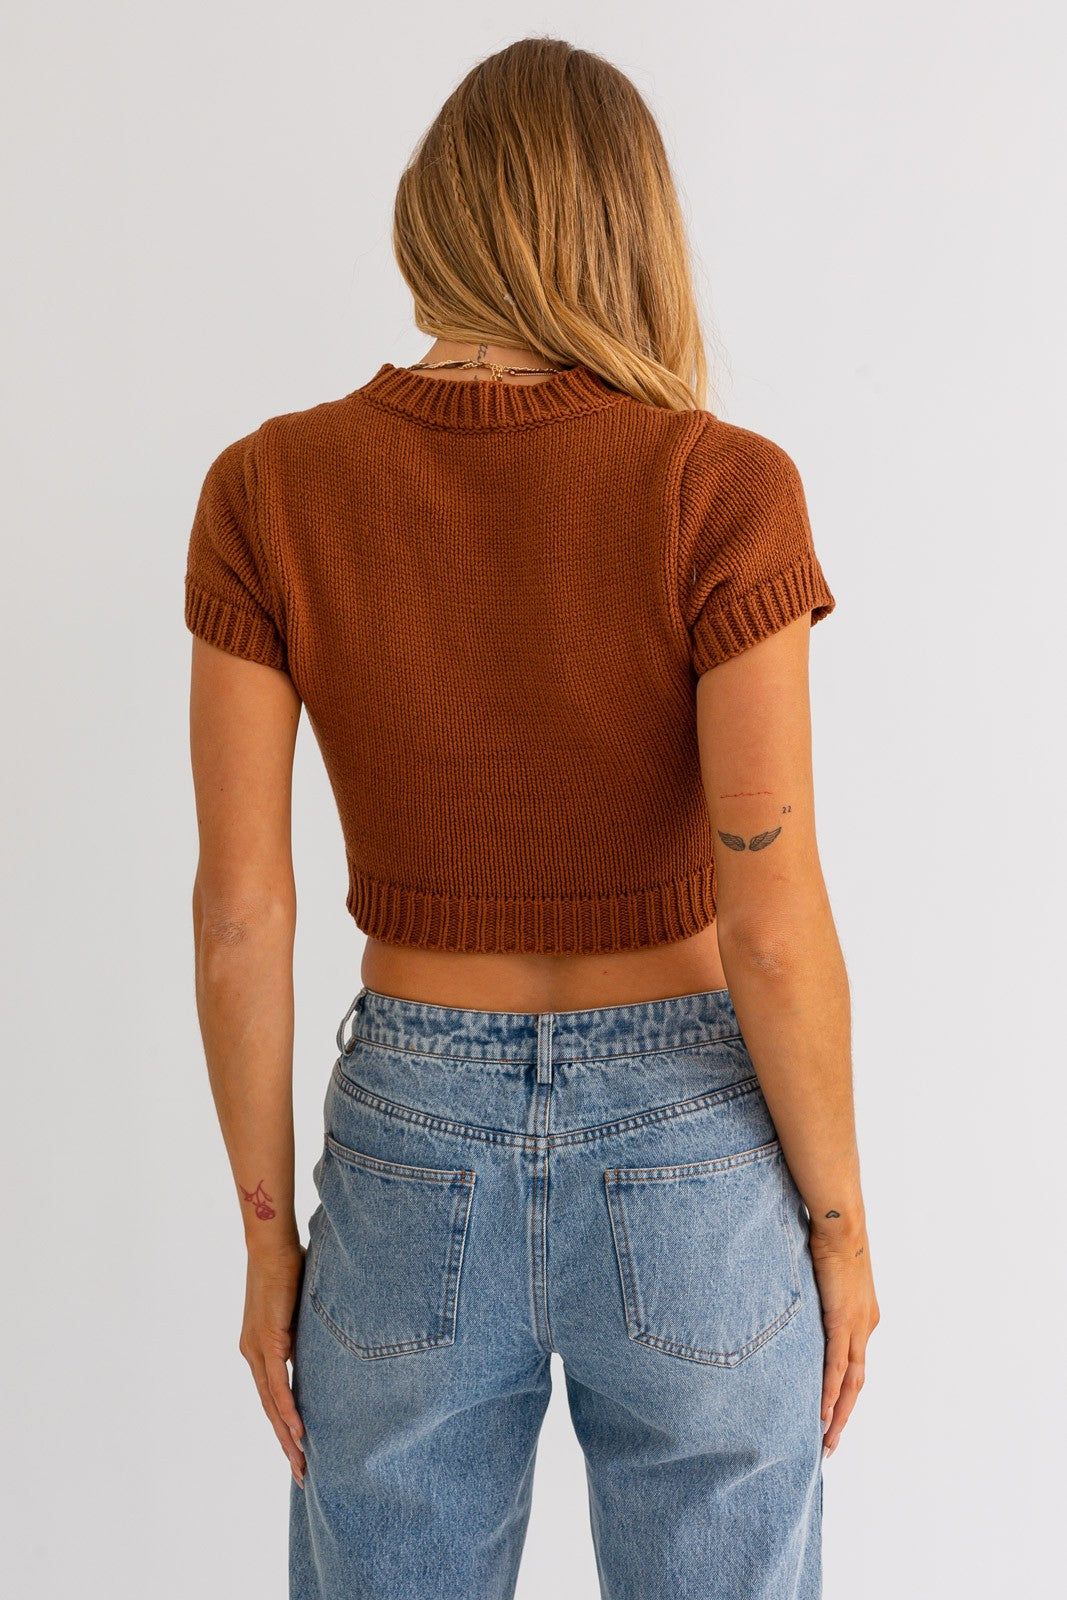 Harlow Knit Top